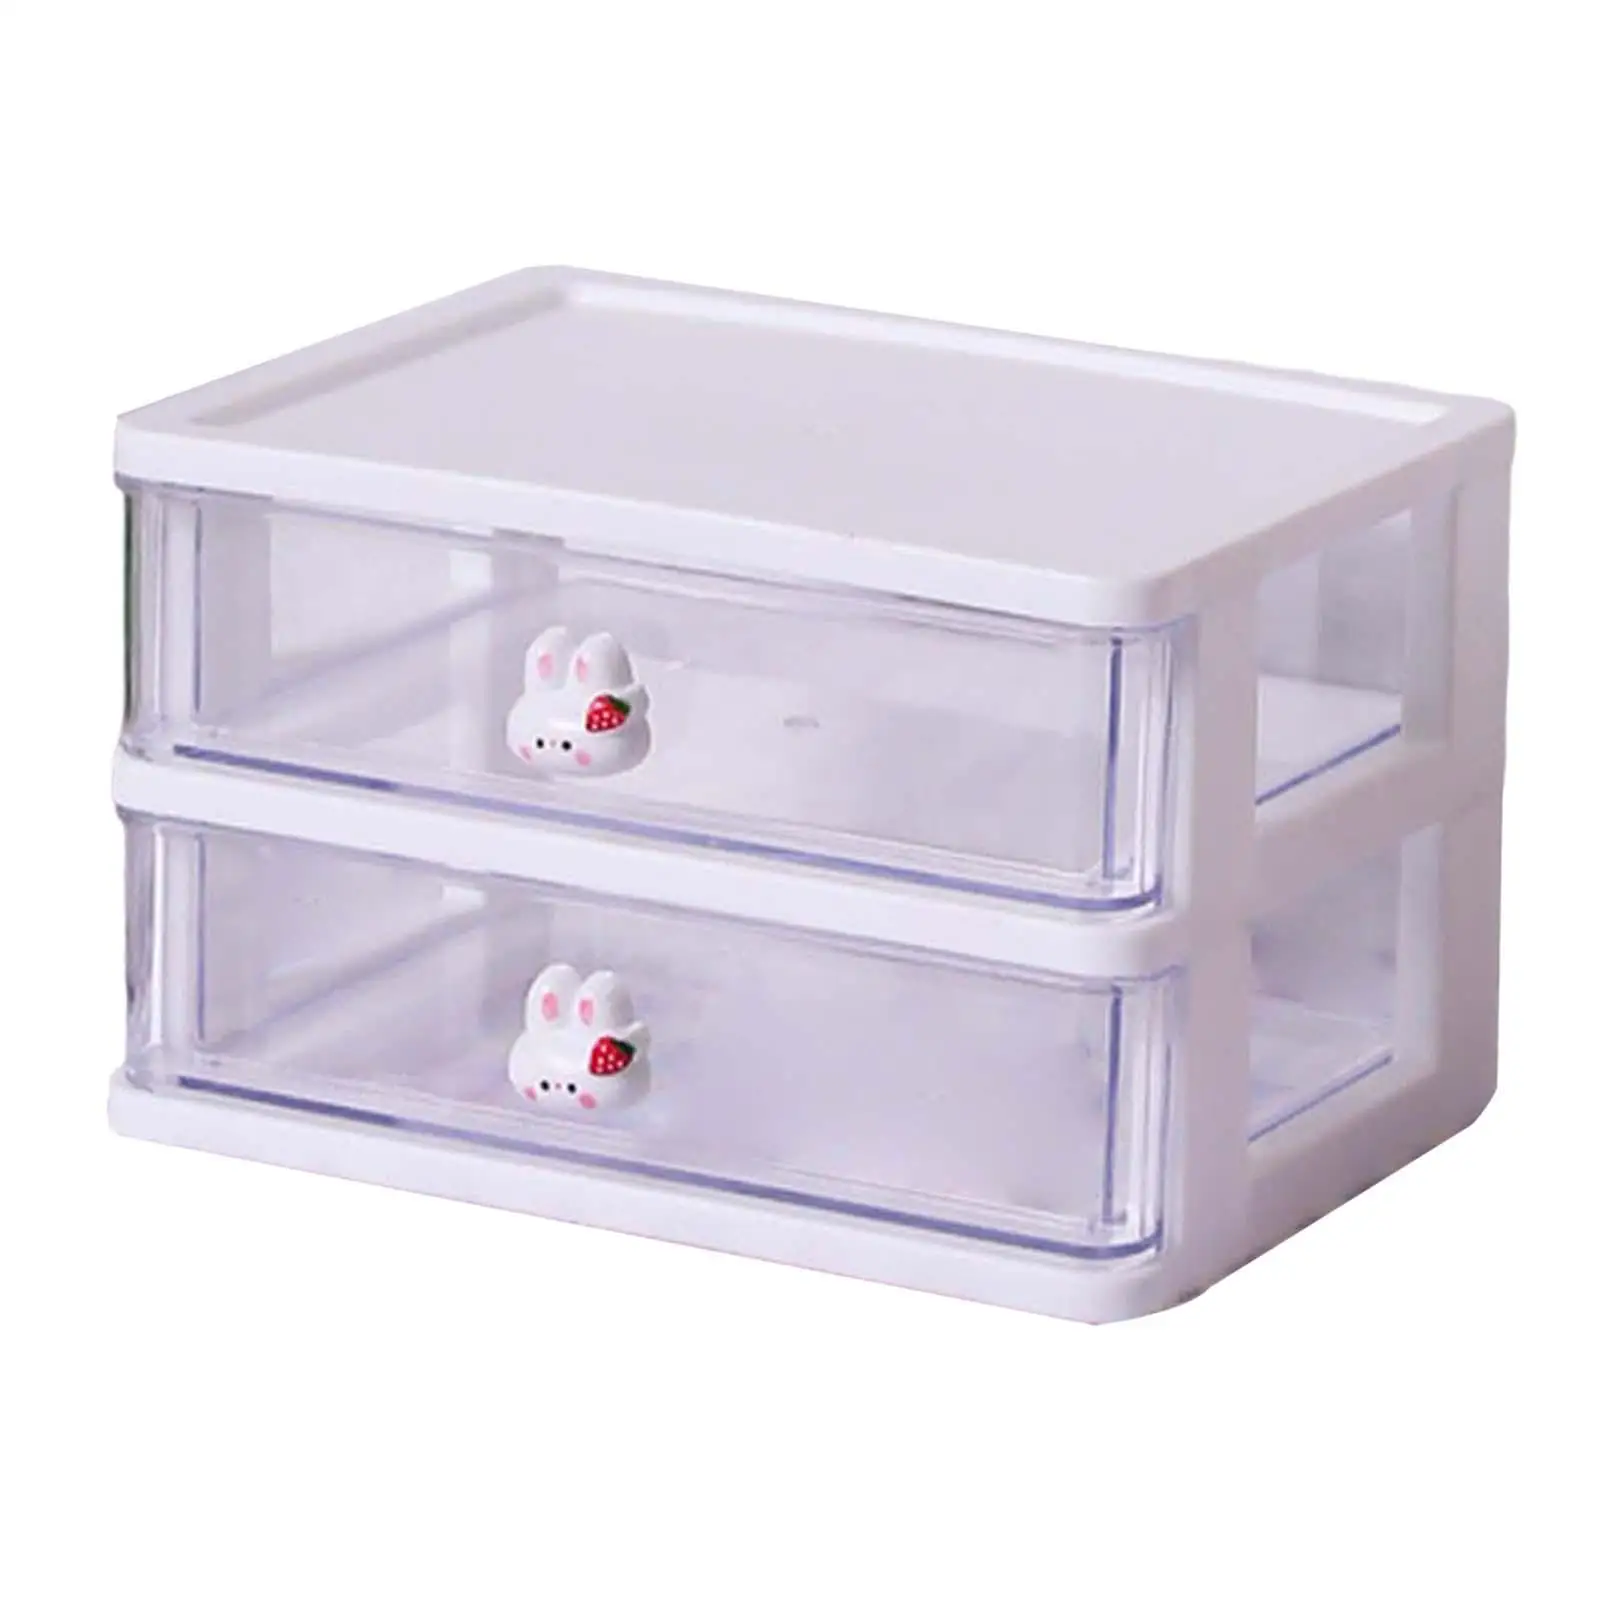 Desk Organizer with Drawer Makeup Holder Storage Drawers Case Cosmetic Organiser Case Tidy for Dressing Table Countertop Dorm